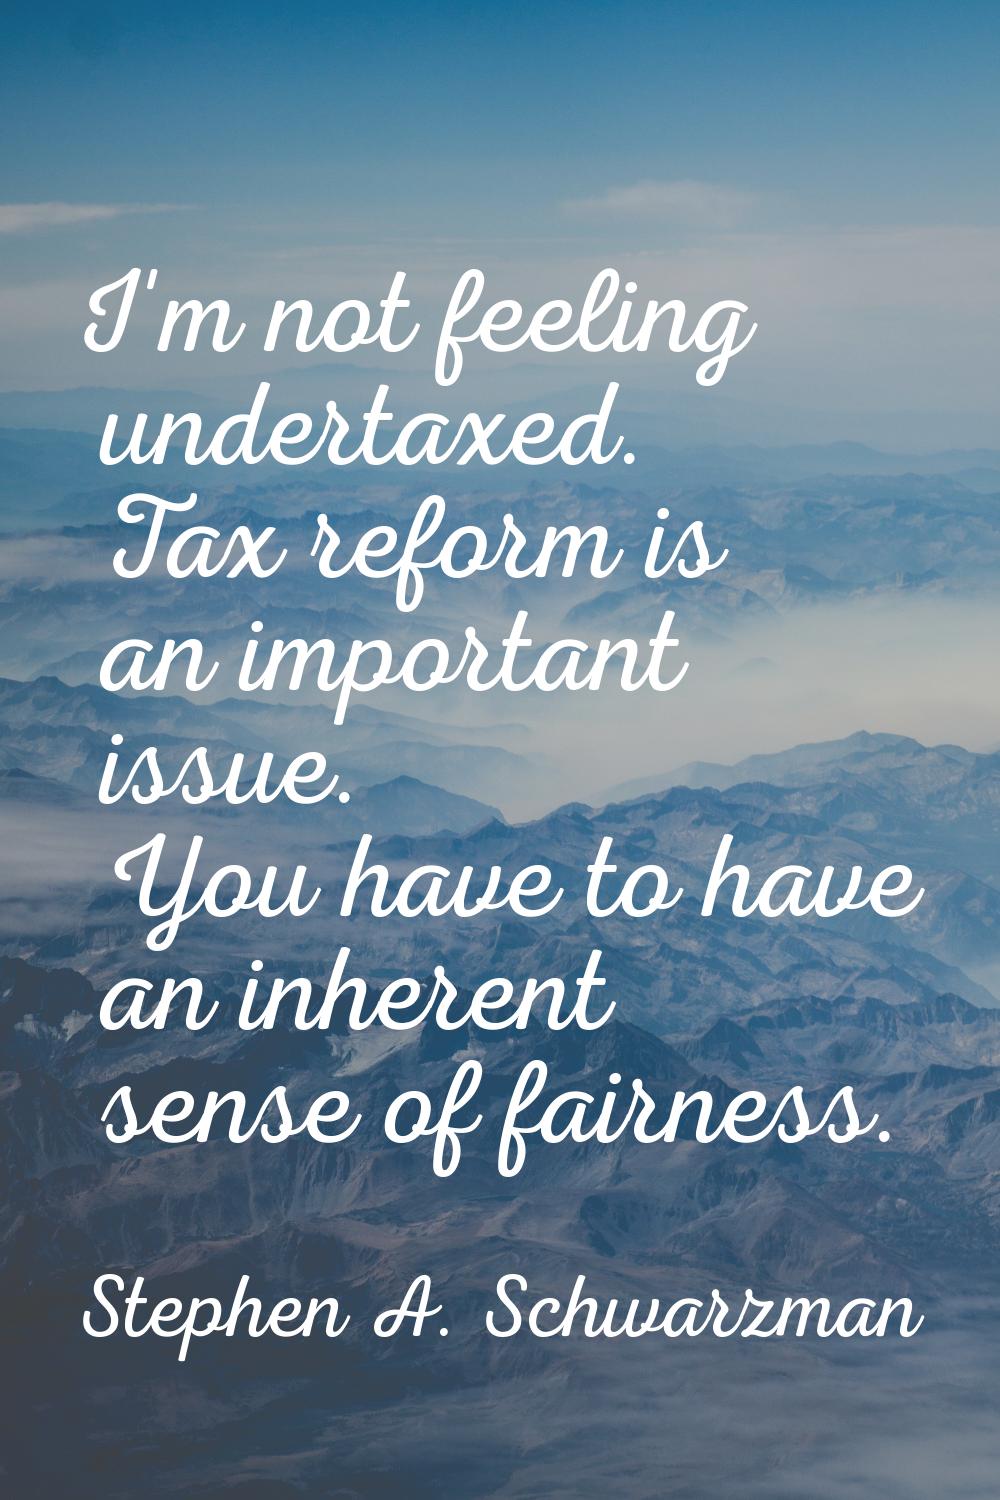 I'm not feeling undertaxed. Tax reform is an important issue. You have to have an inherent sense of